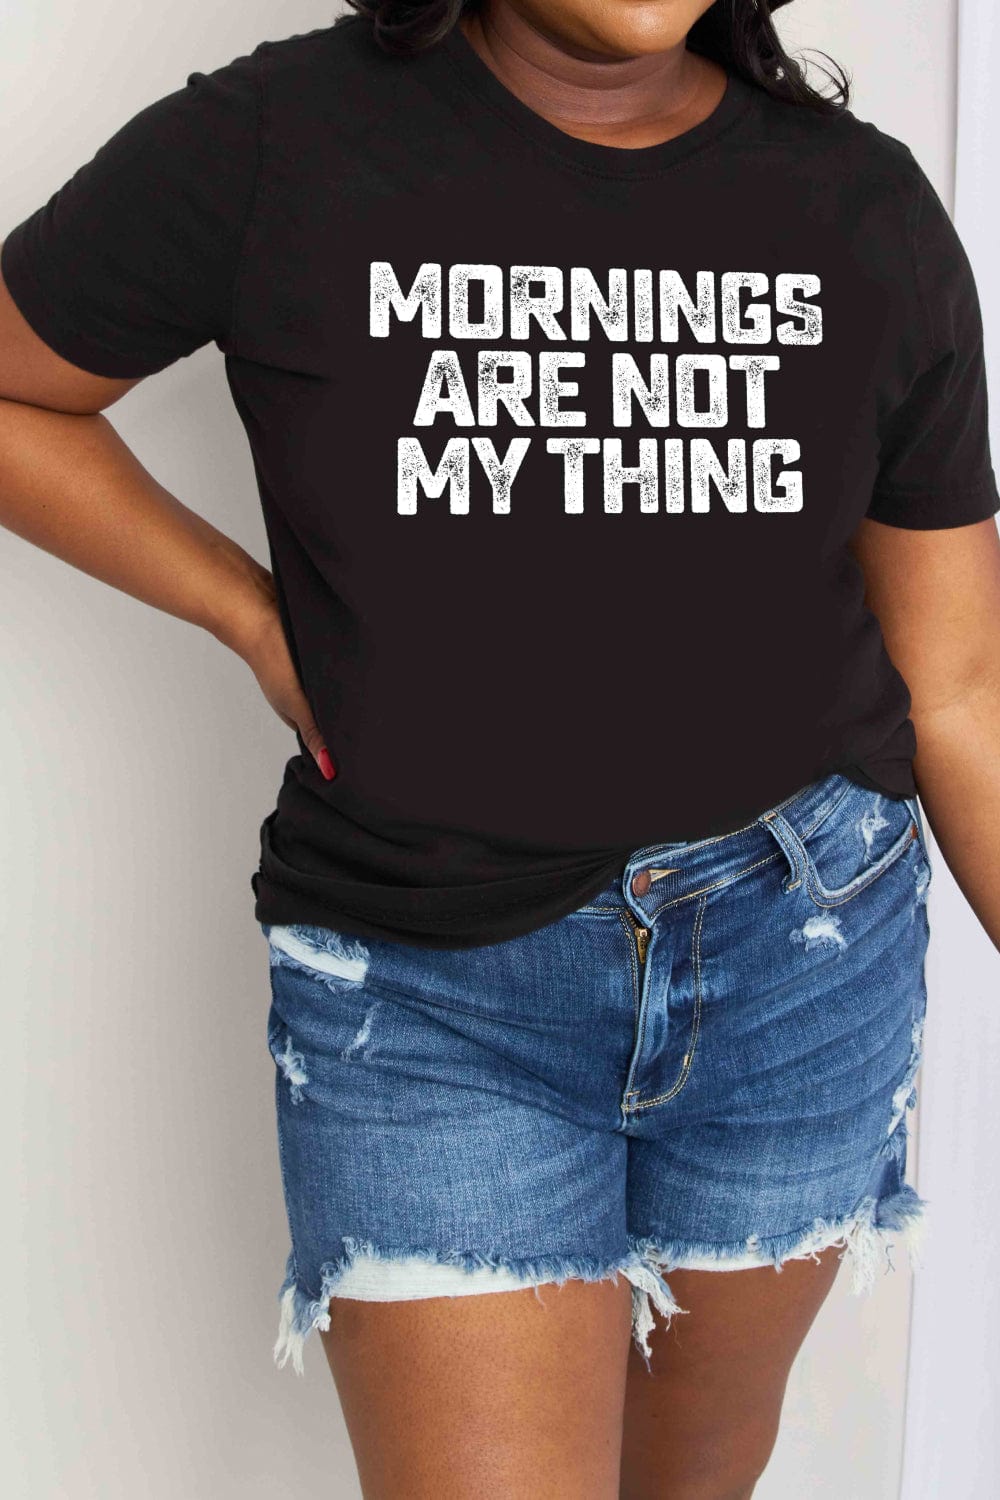 MORNINGS ARE NOT MY THING Graphic Cotton T-Shirt - Body By J'ne